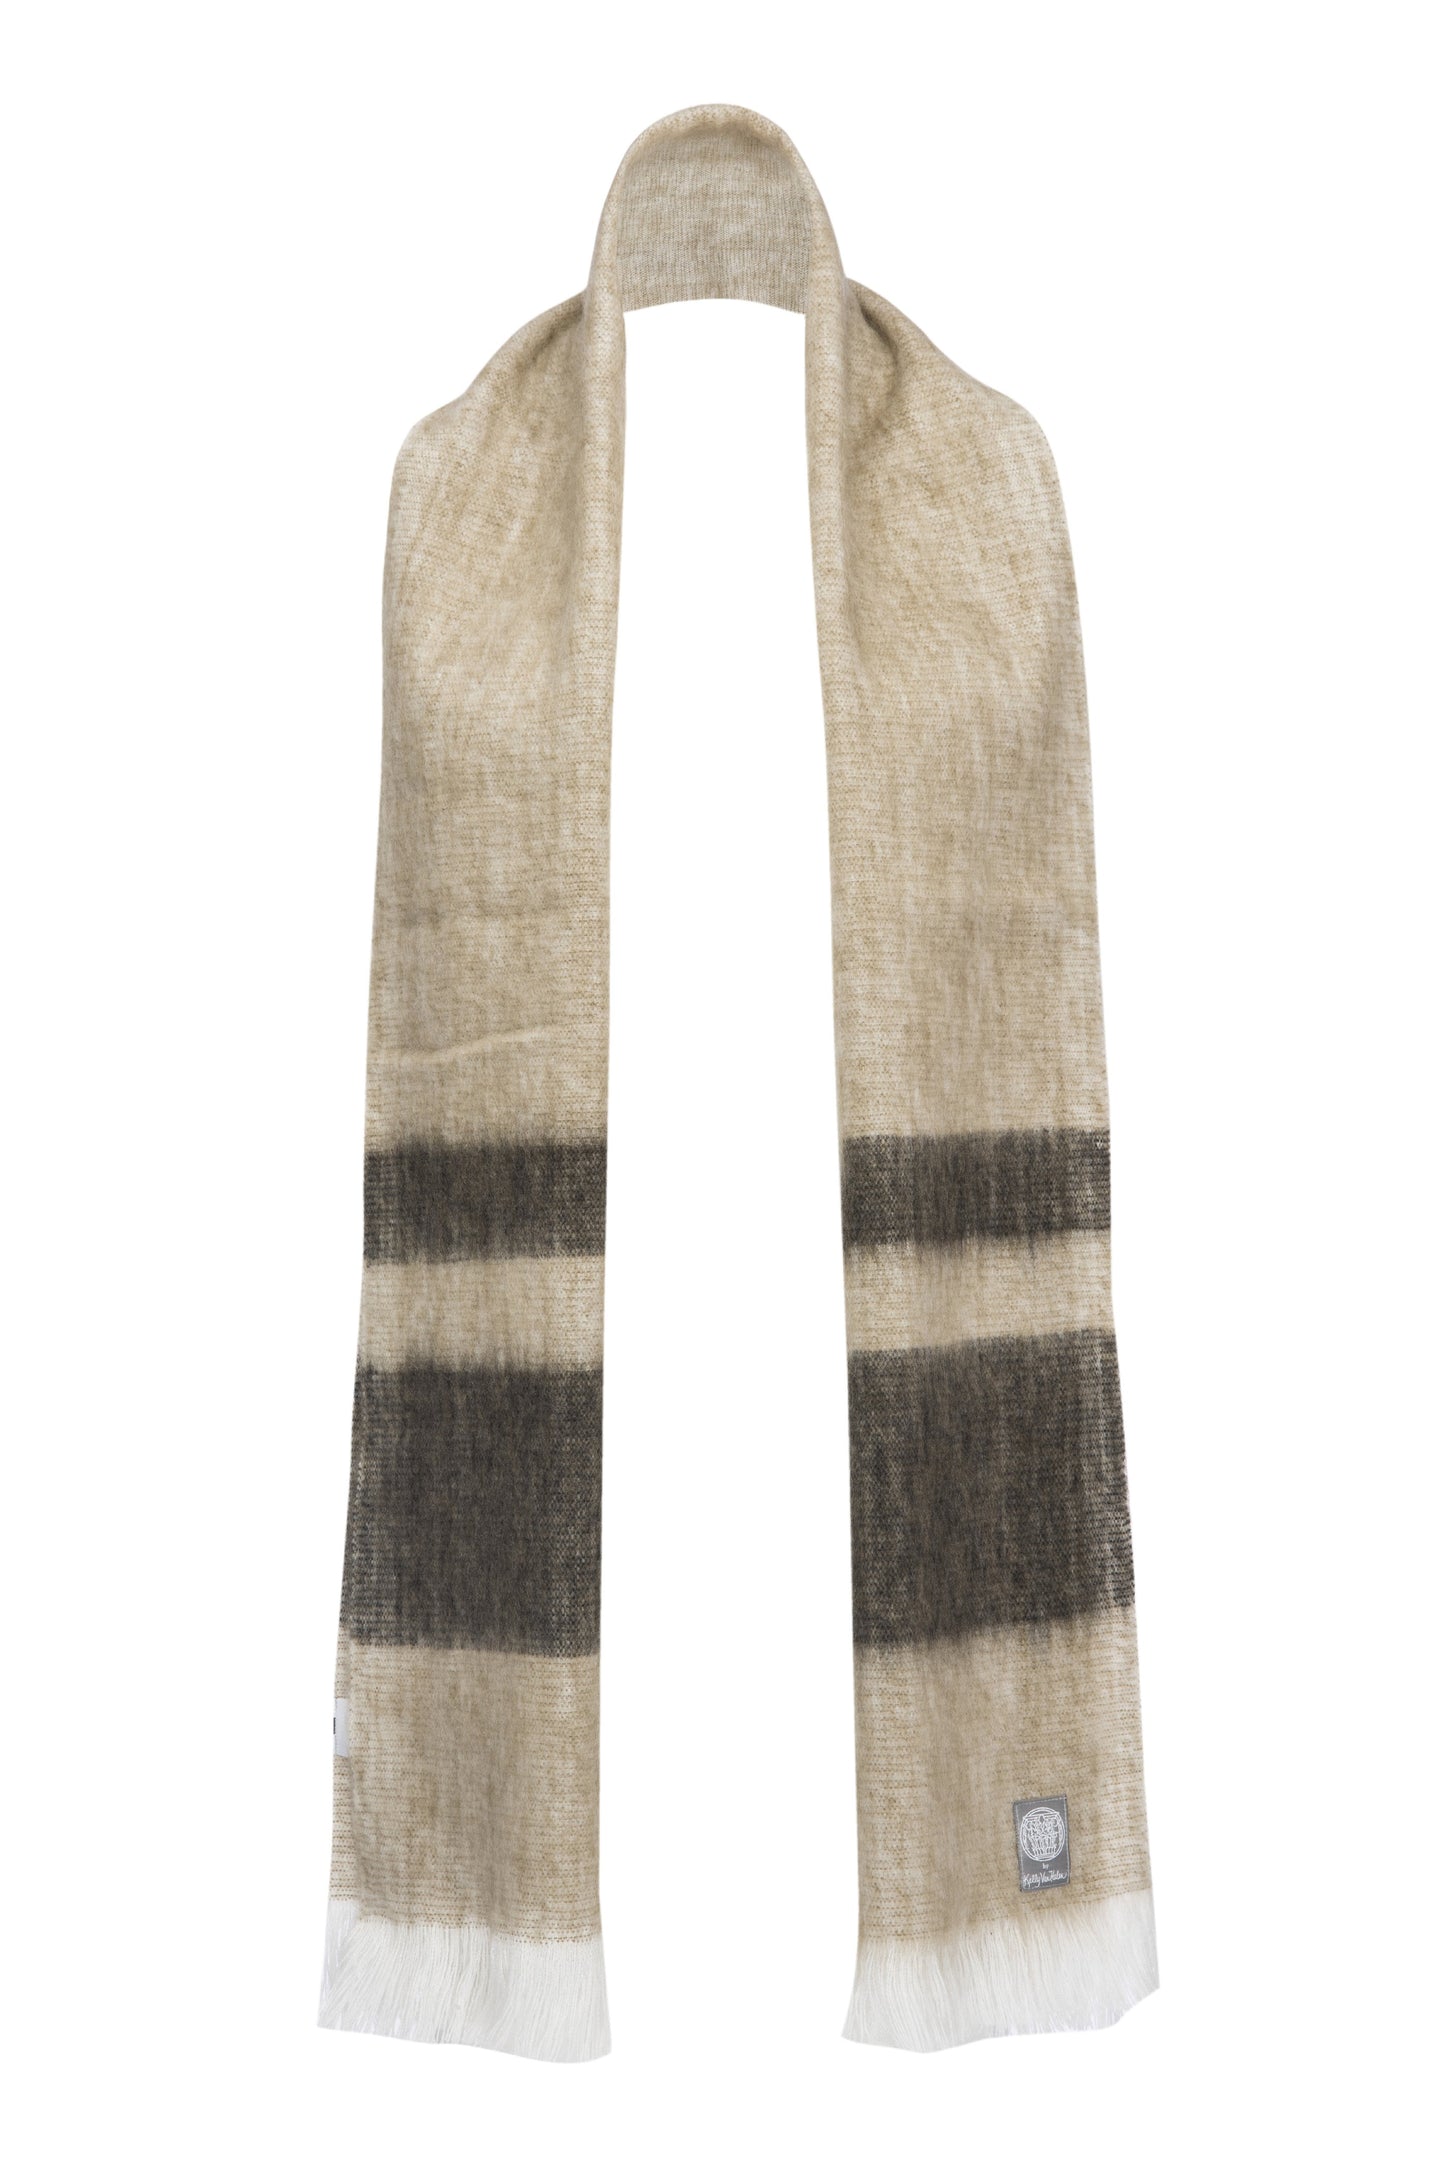 Alpaca Fringed Scarf in Oatmeal/Taupe